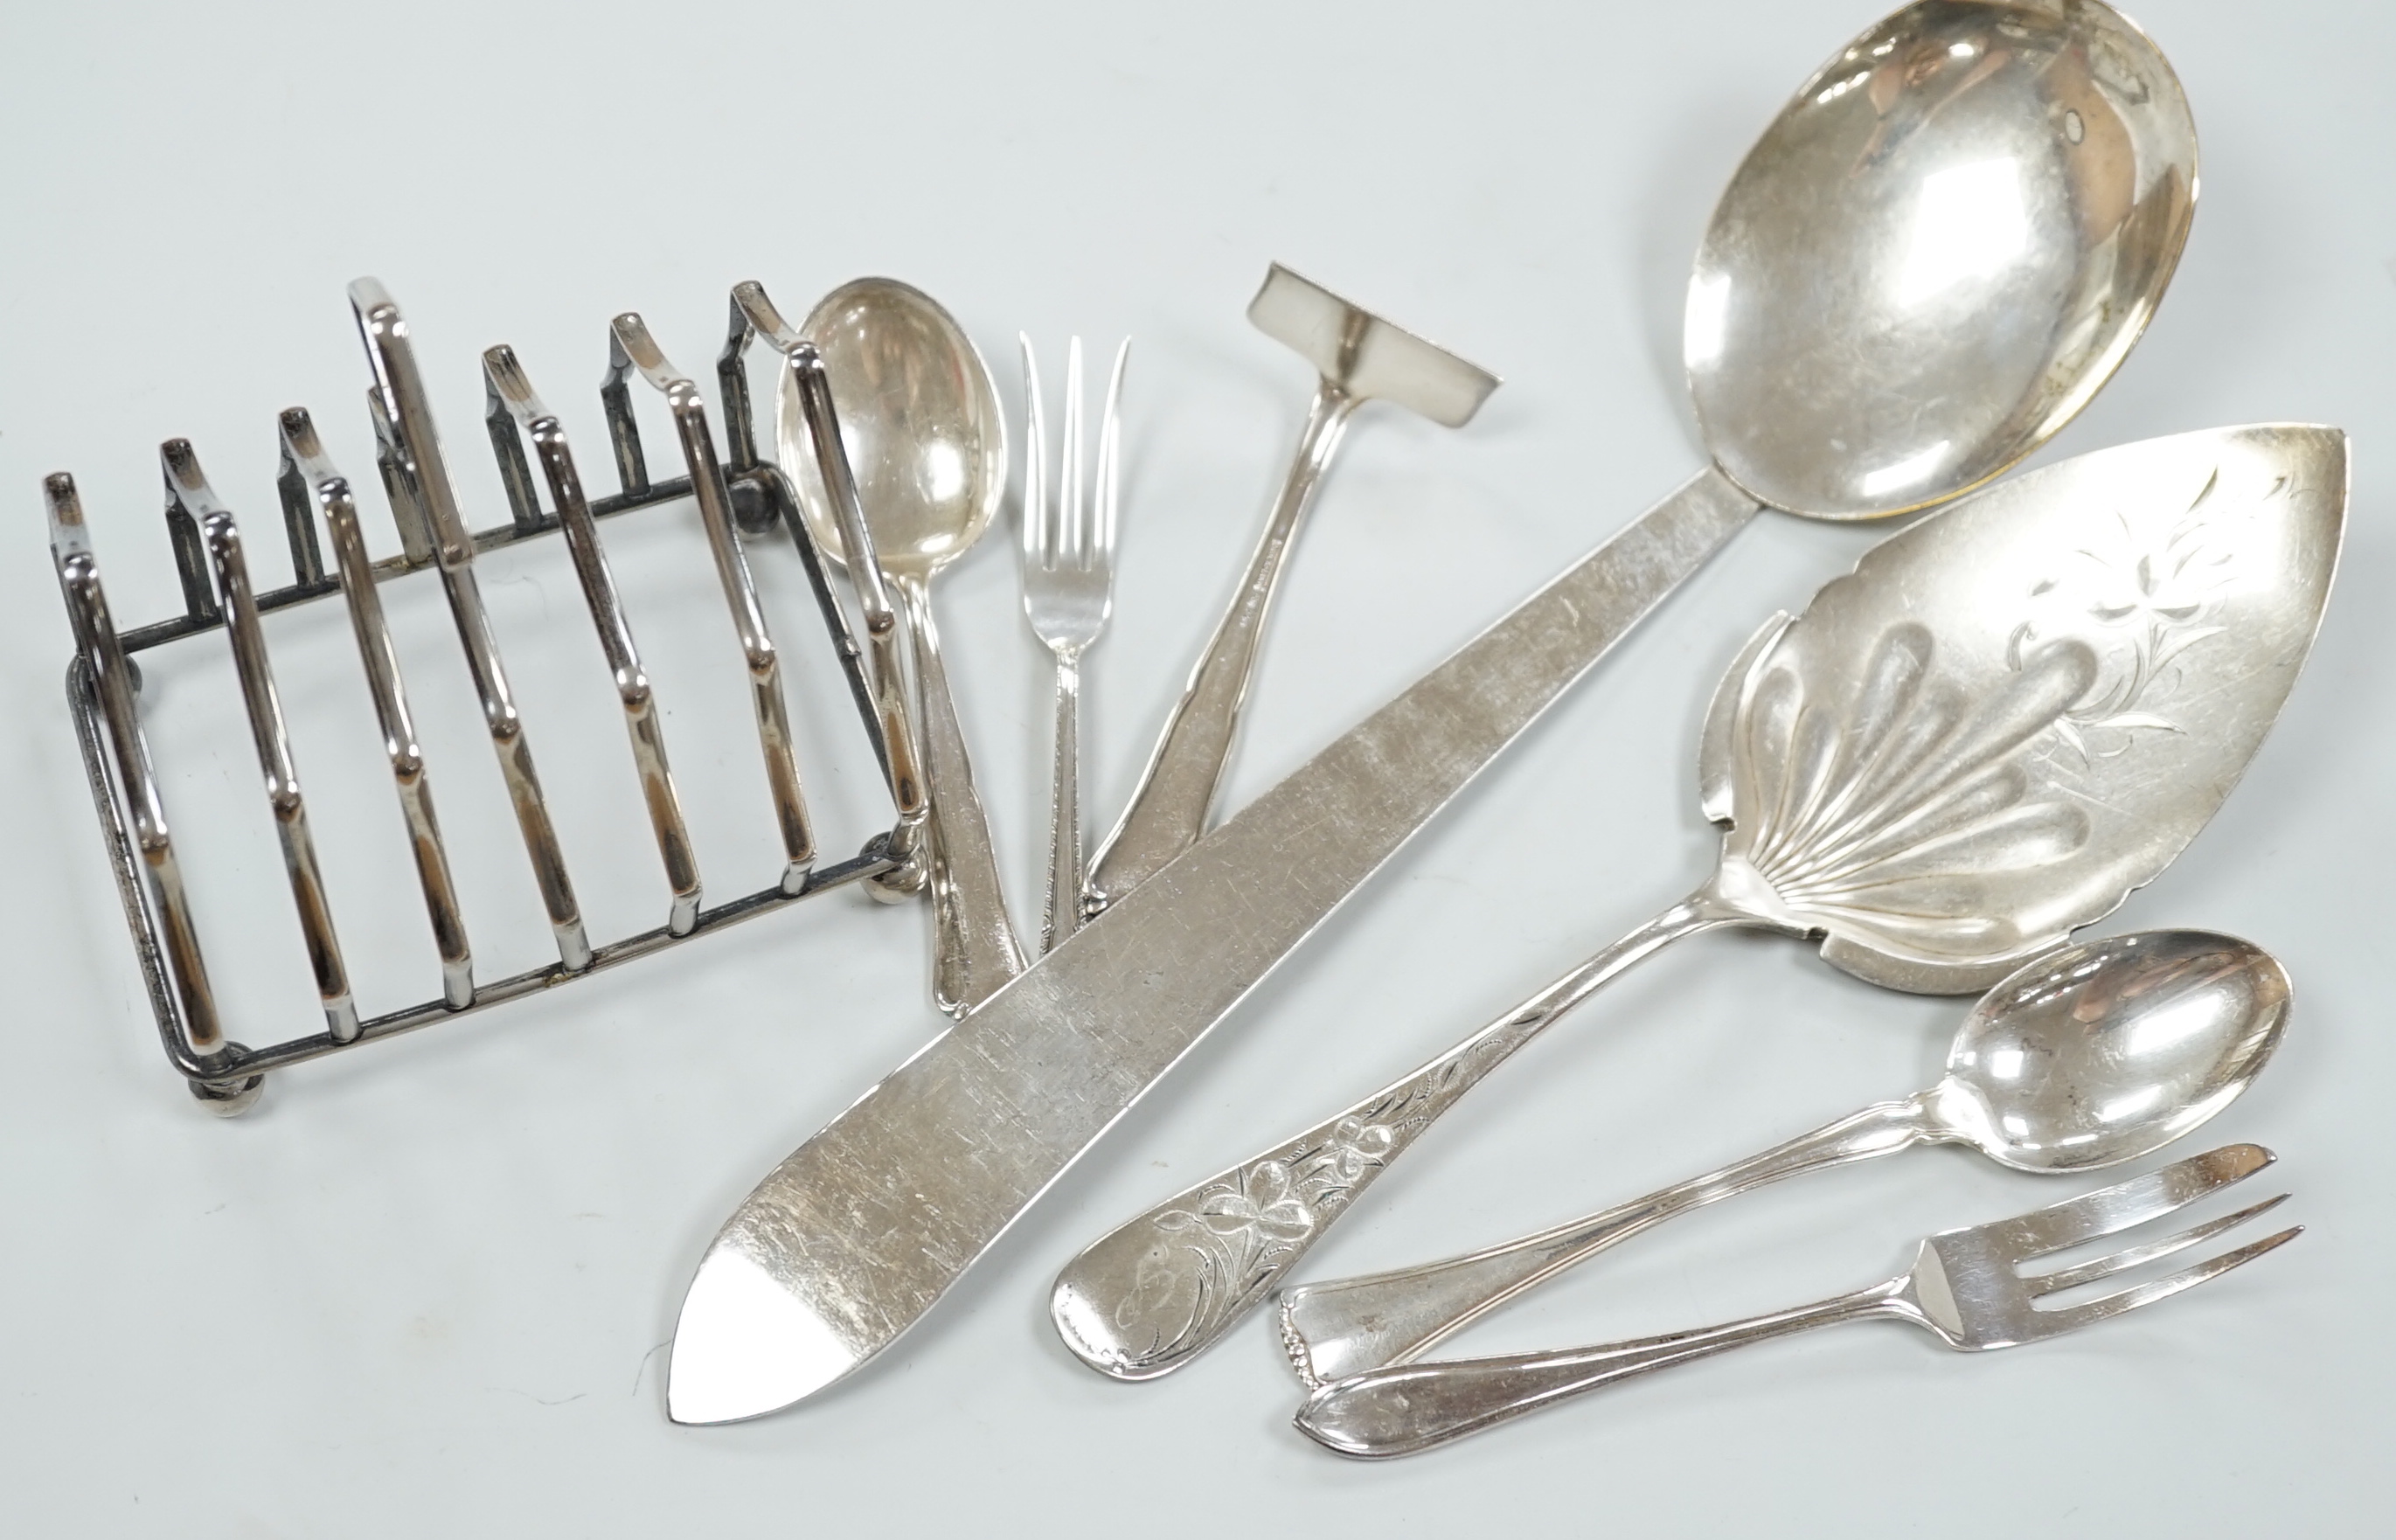 A pair of sterling pepperettes, five other sterling or 800 standard items of flatware and a quantity of silver plated flatware.